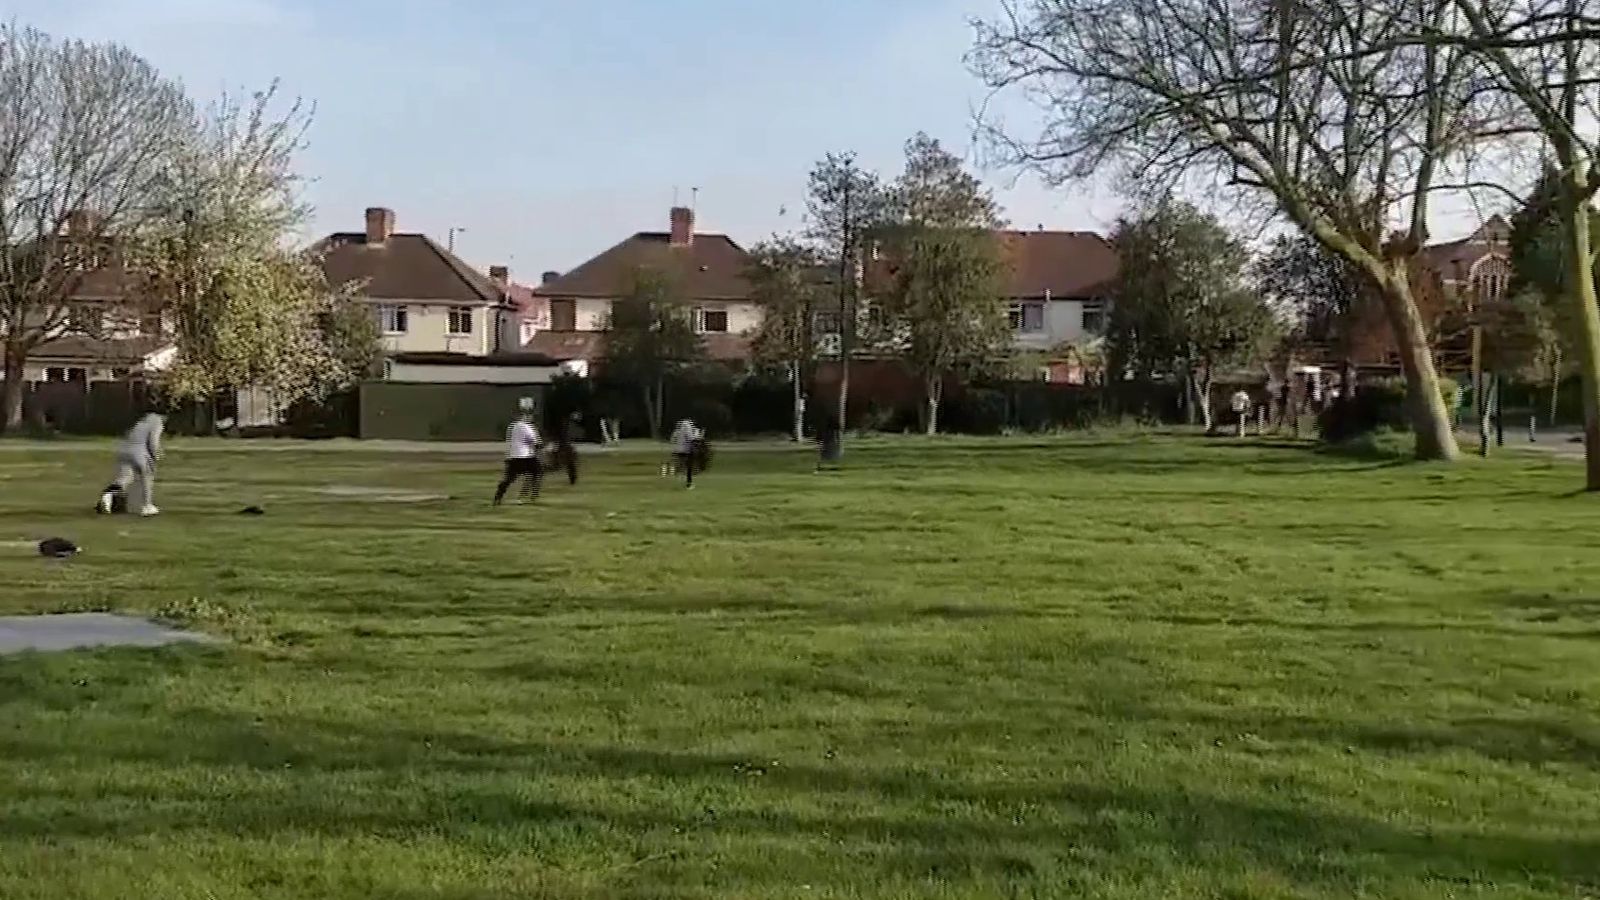 Coronavirus: Men playing cricket in London park run from police as they flout lockdown restrictions